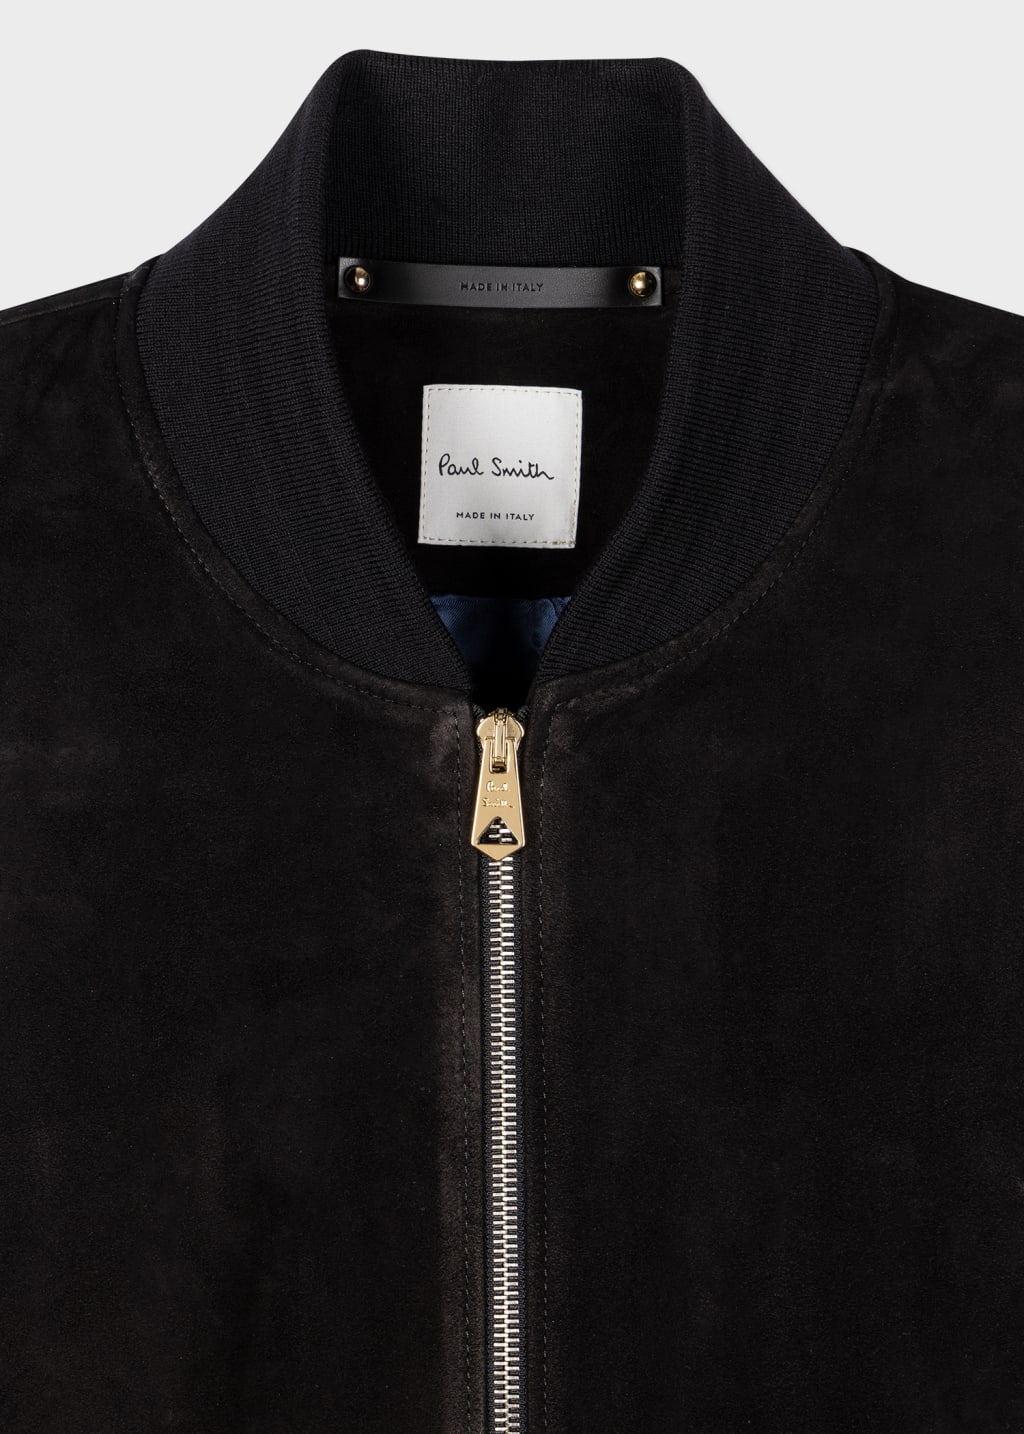 Detail View - Black Suede Bomber Jacket Paul Smith